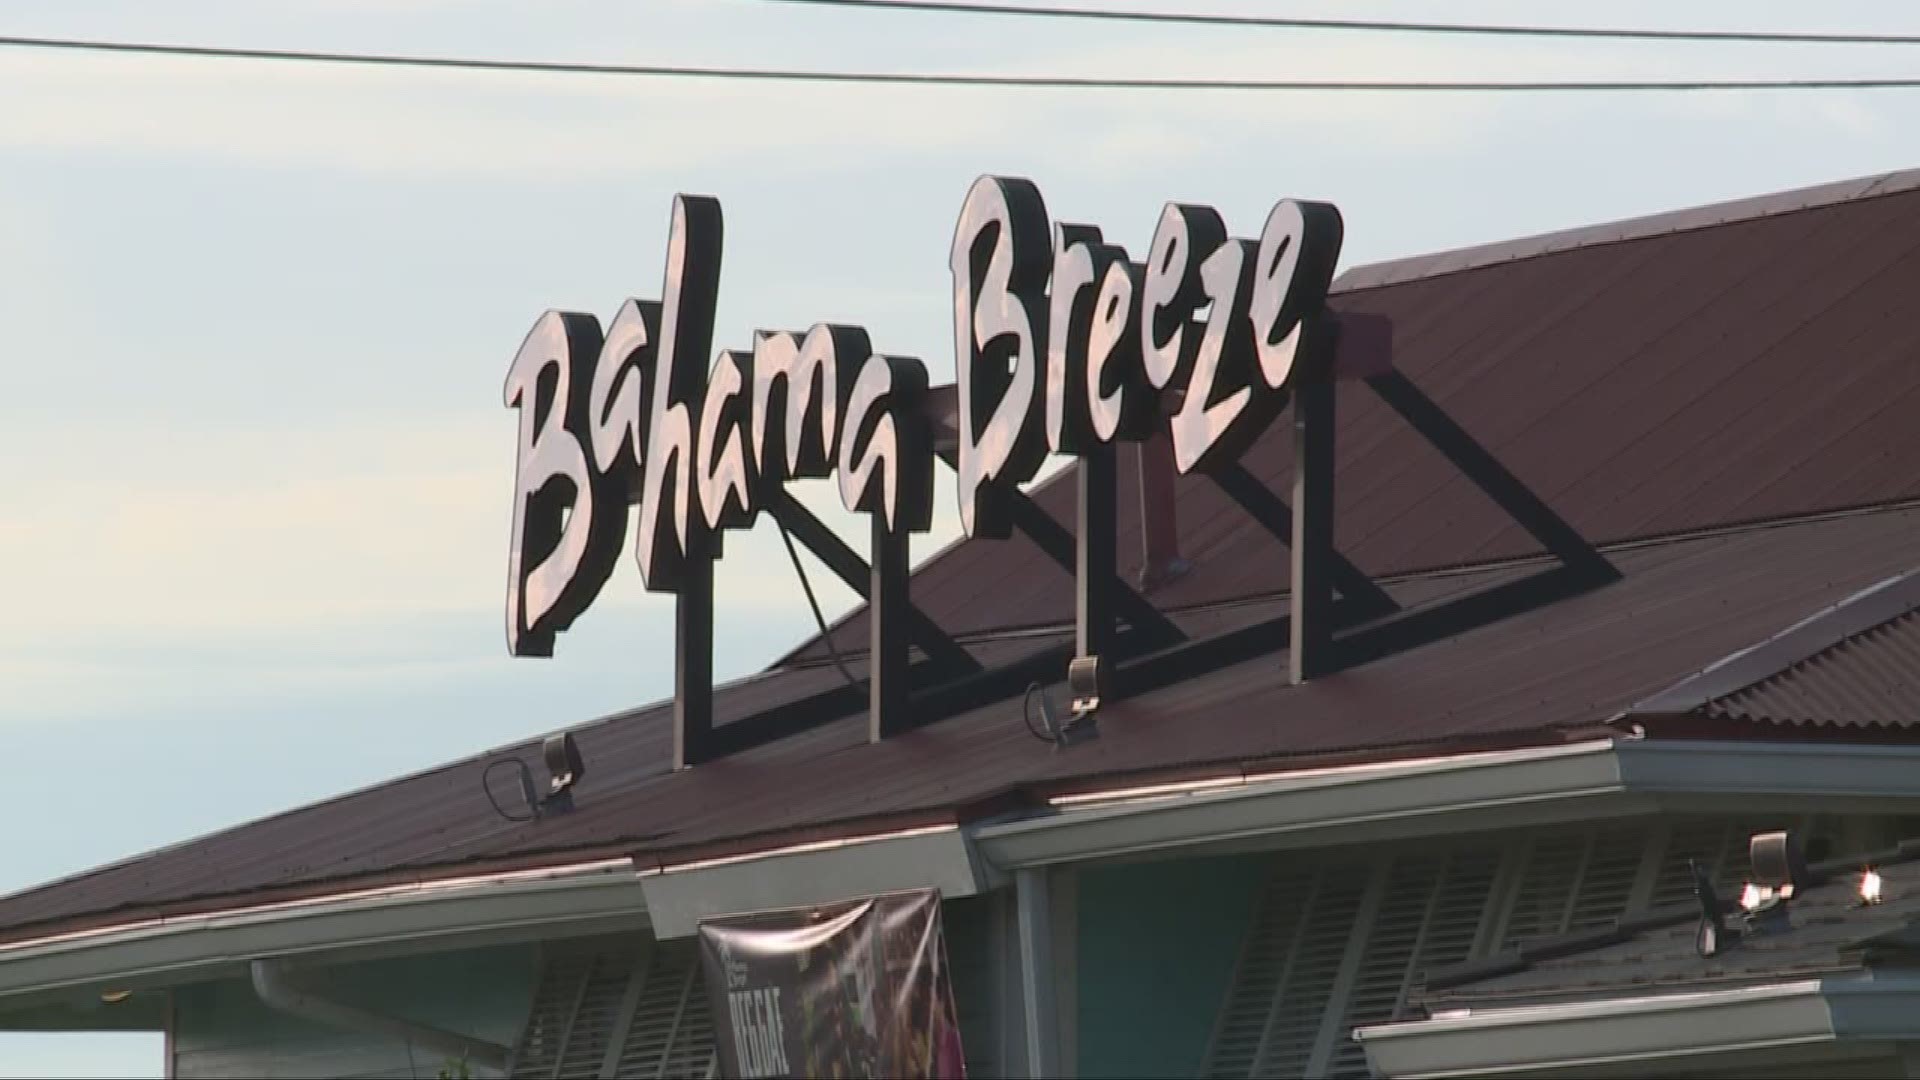 Manager at Bahama Breeze fired after incident involving alleged racial profiling